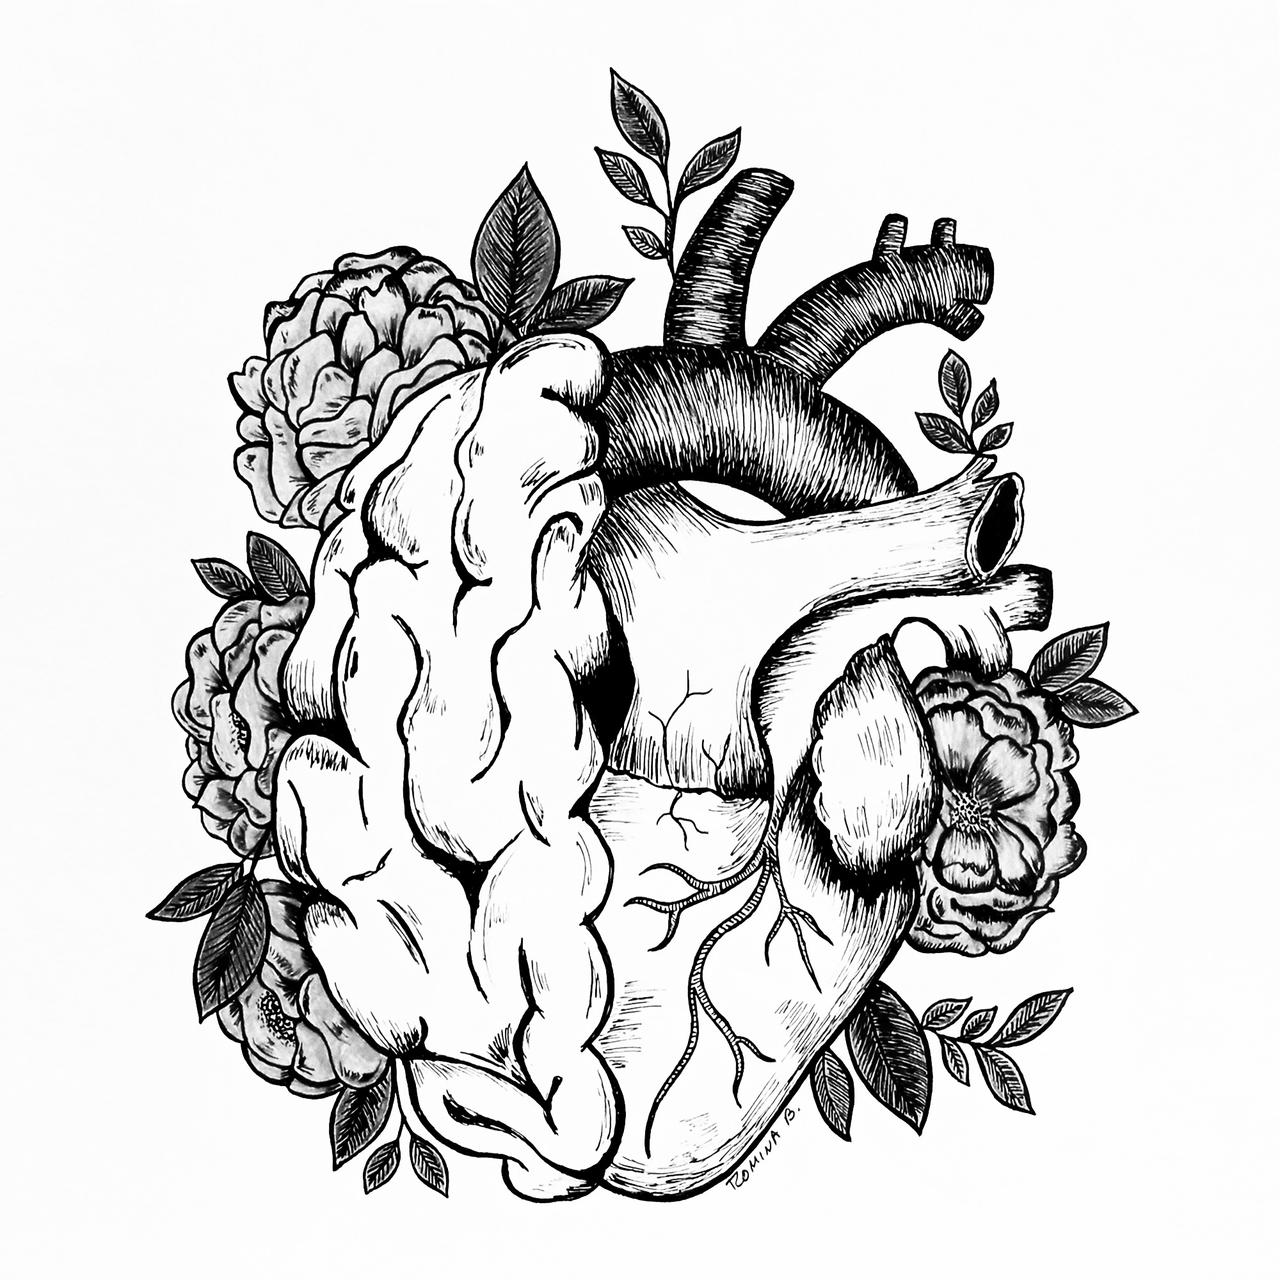 Heart and brain drawing by art090 on DeviantArt